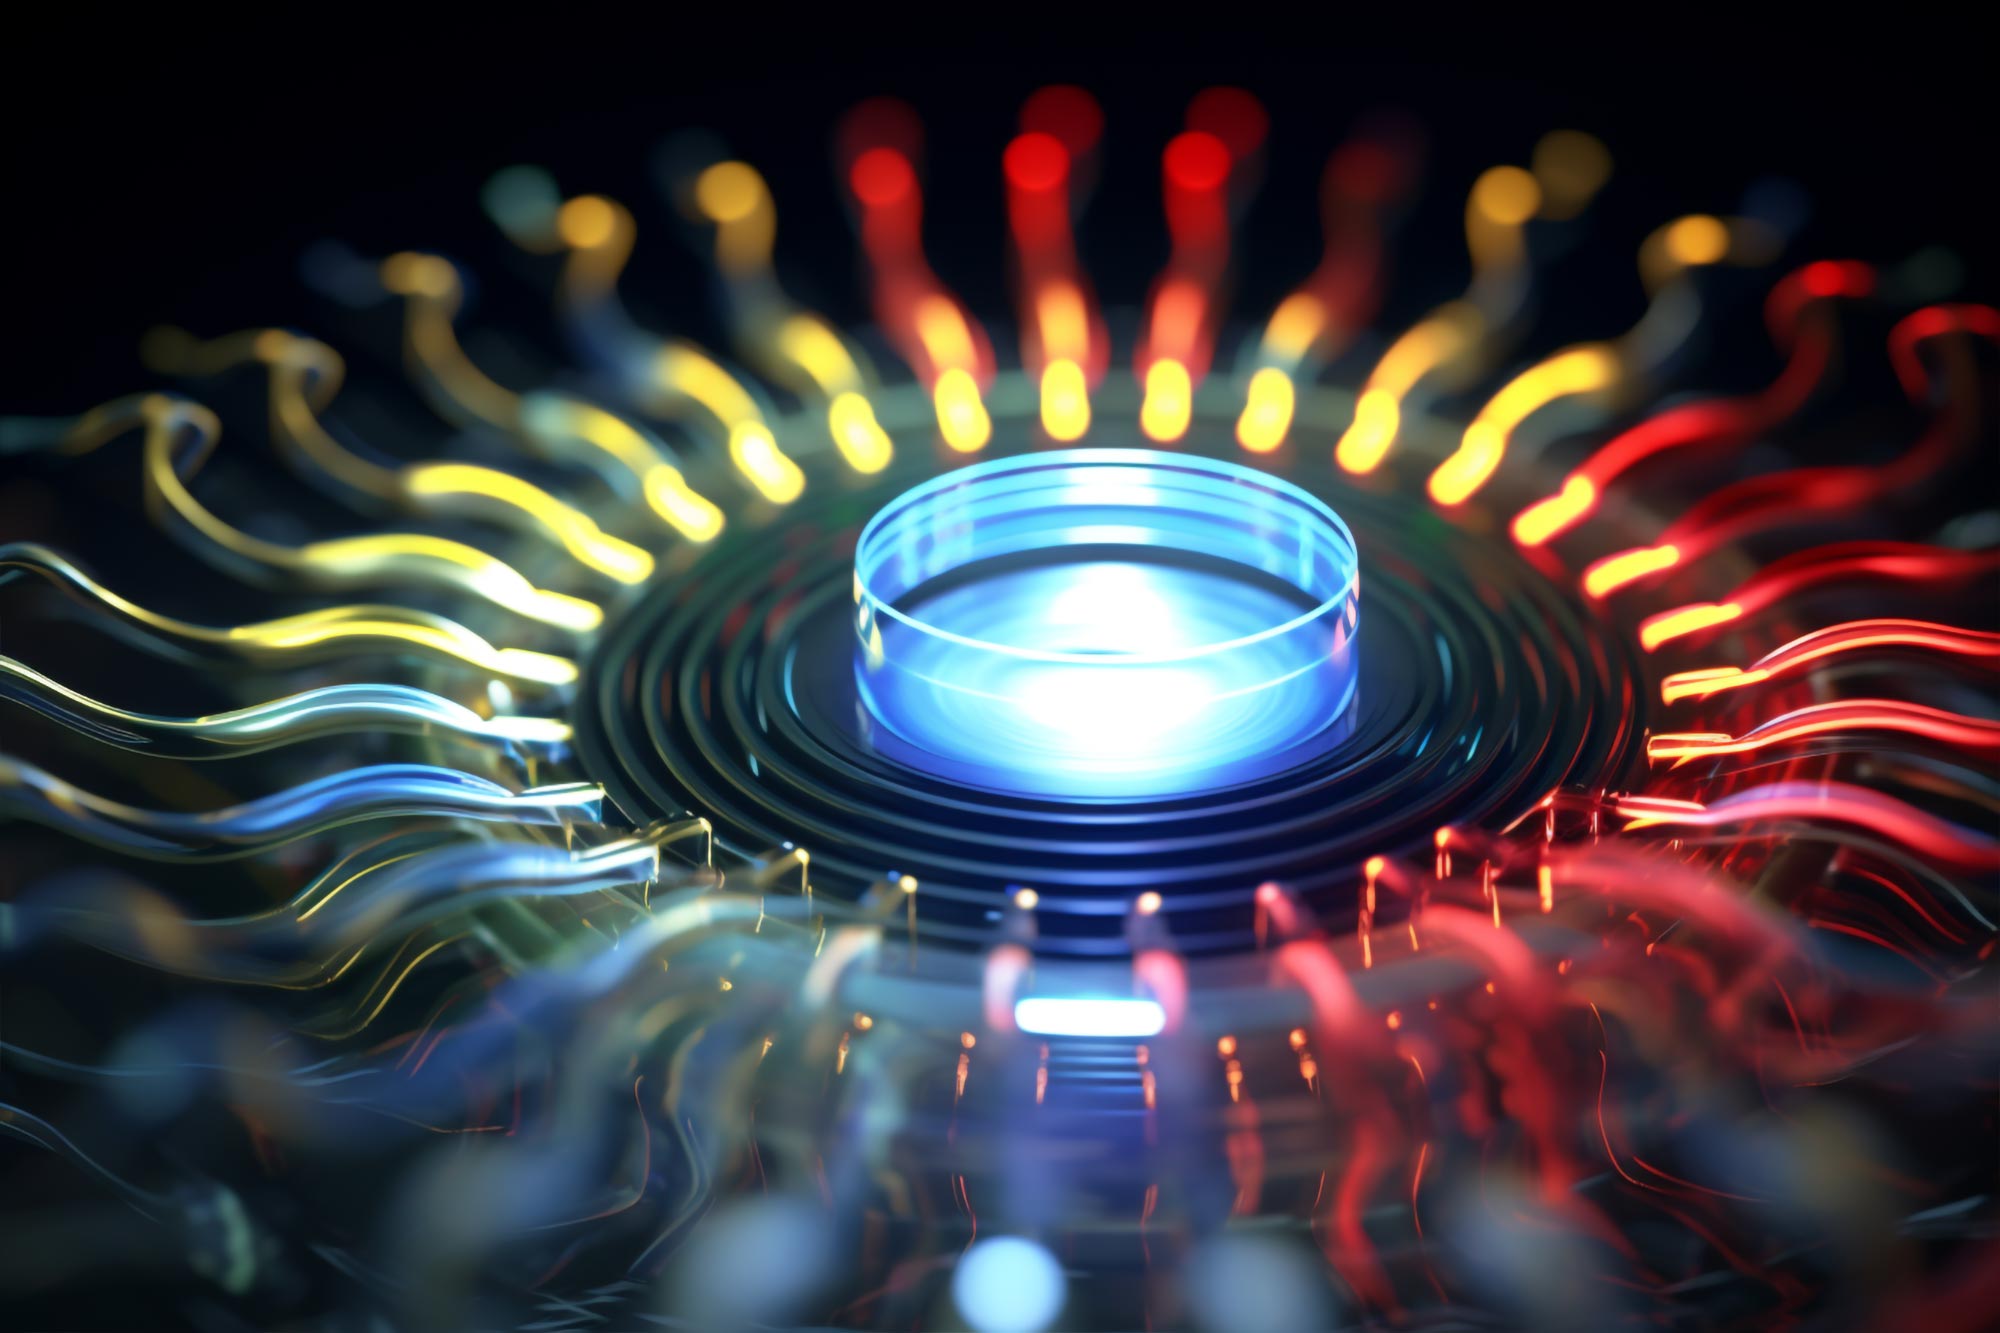 Spintronics Breakthrough – Scientists Confirm a Previously Undetected Physics Phenomenon